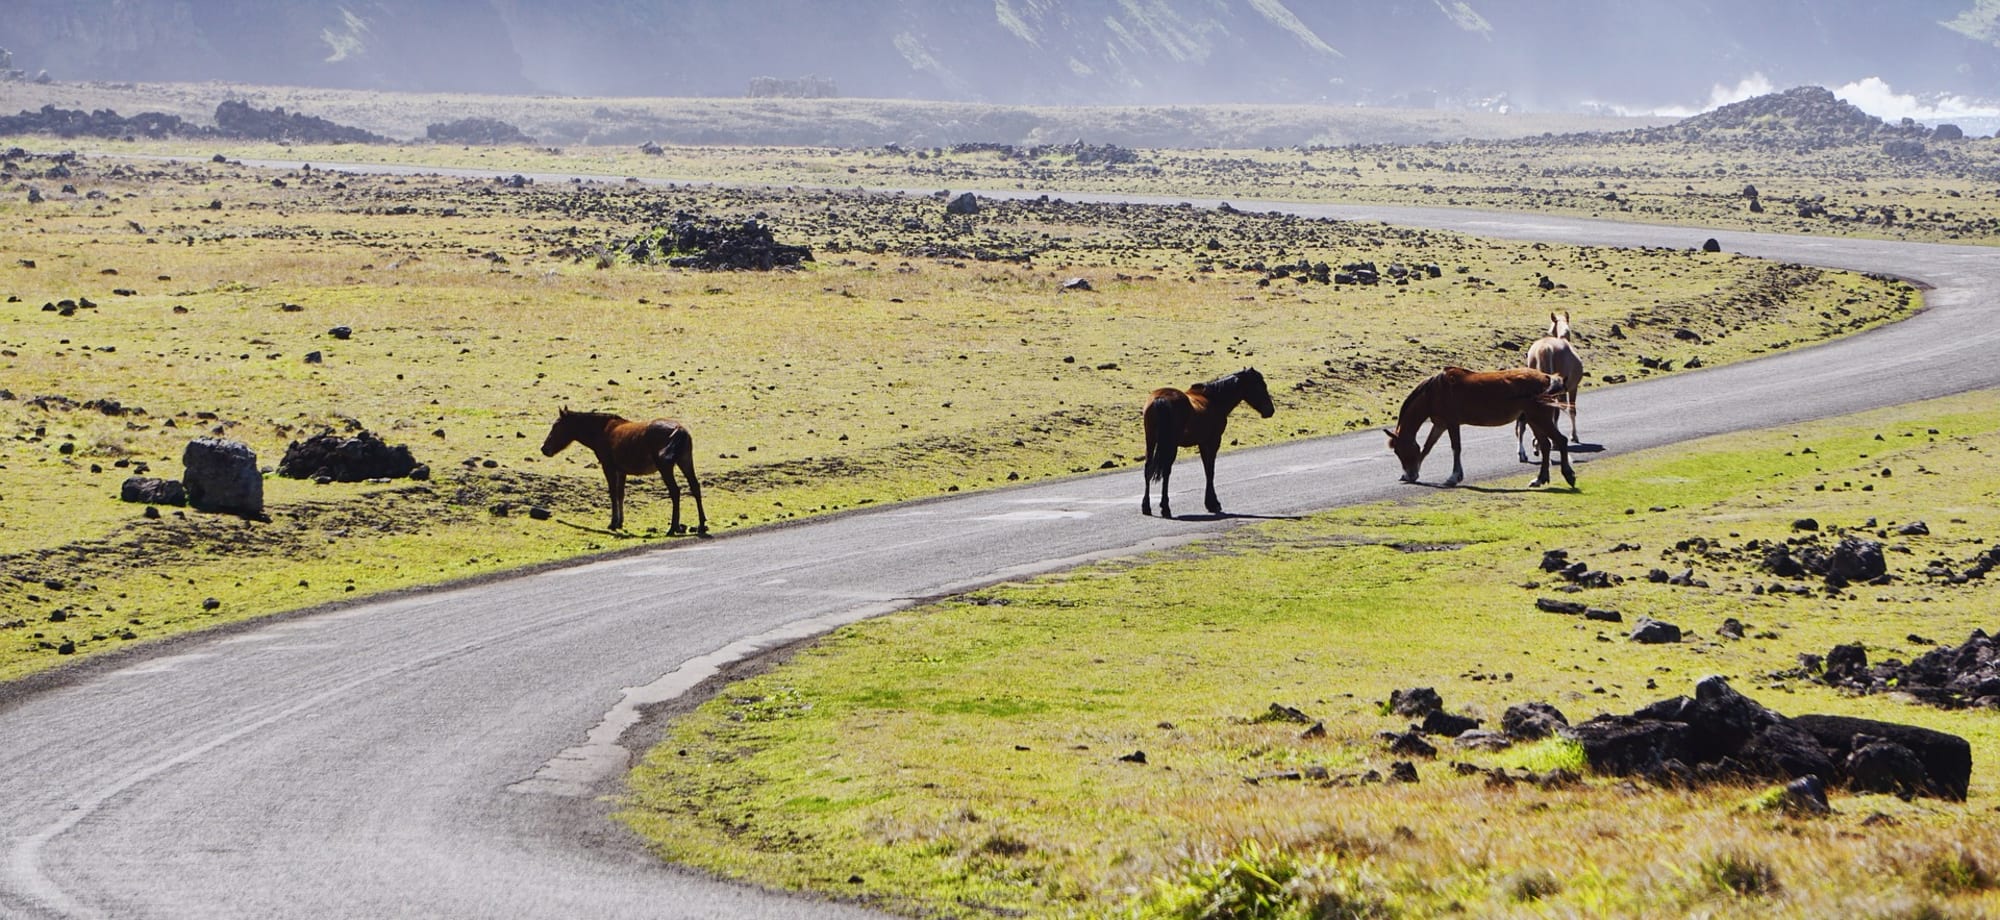 Four horses are walking along a road on Easter Island, with mountains and greenery in the background. 